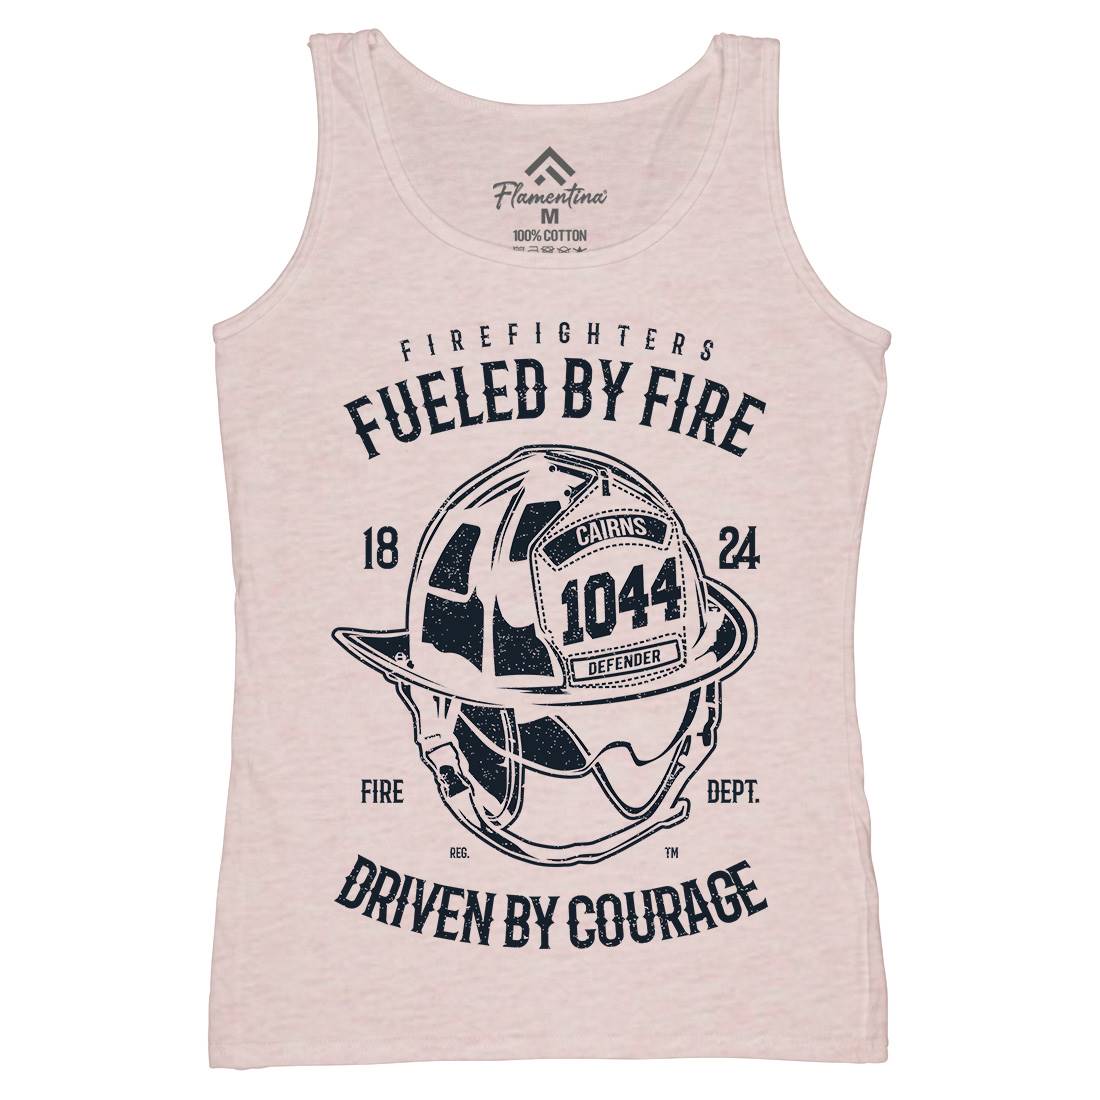 Fuelled By Fire Womens Organic Tank Top Vest Firefighters A667